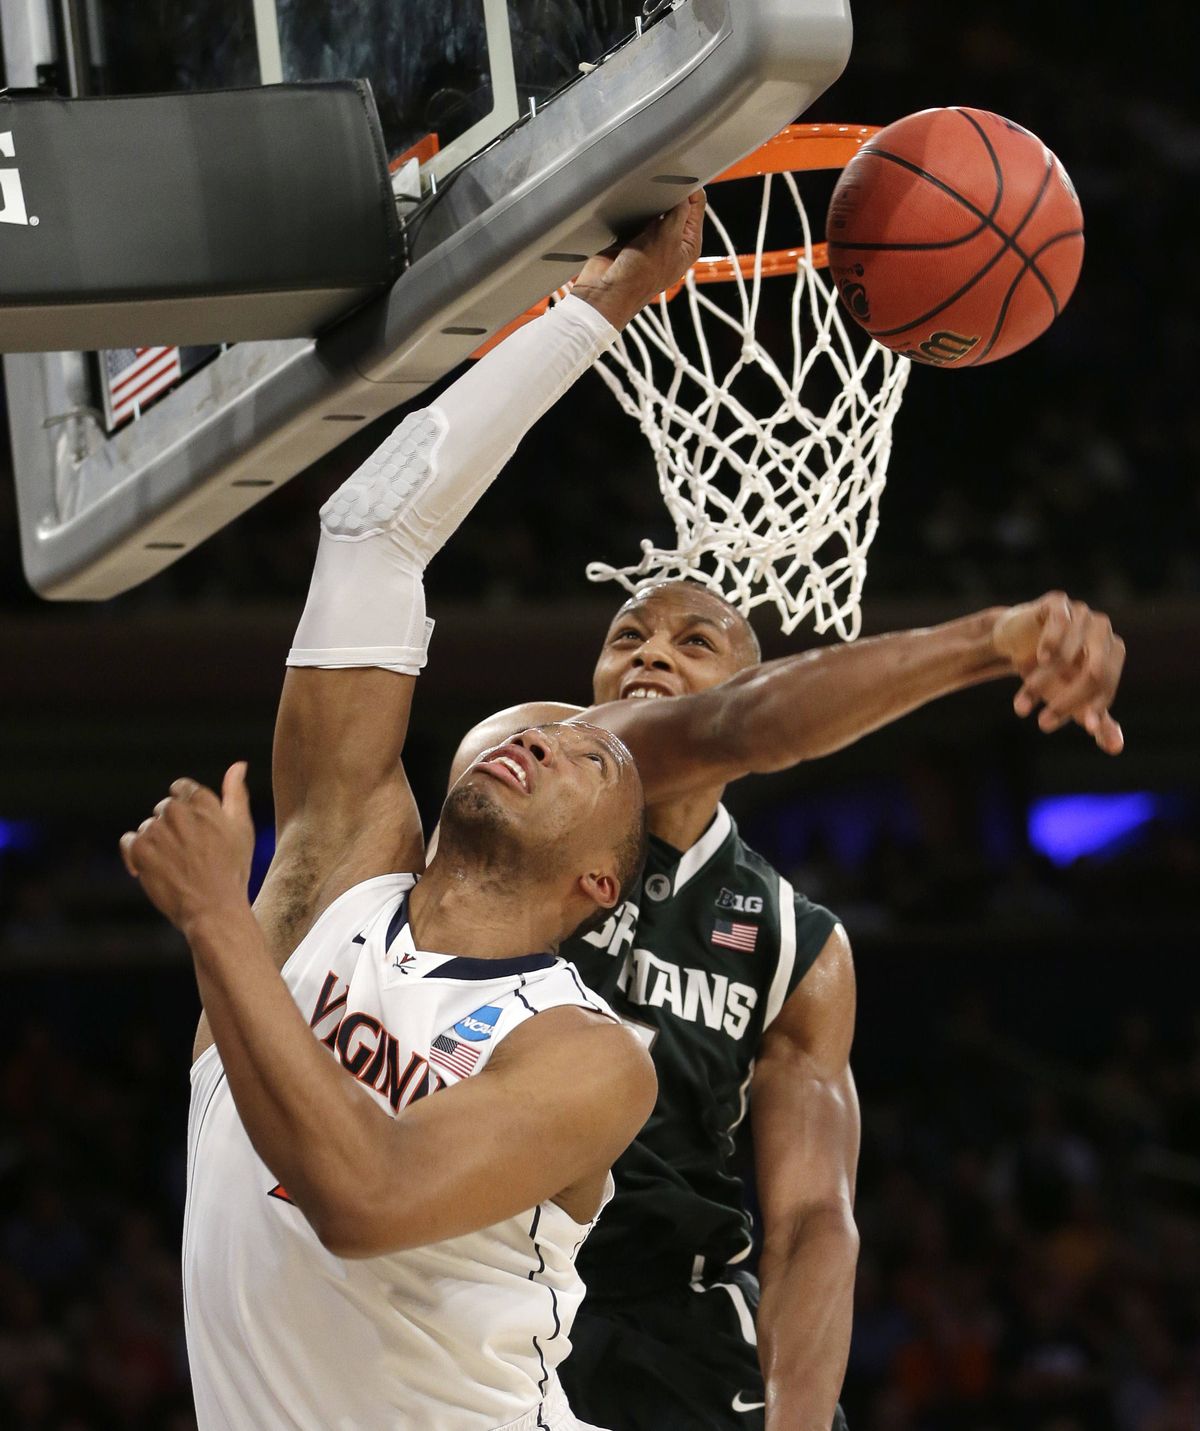 Michigan State’s Adreian Payne, right, blocks a shot by Virginia’s Akil Mitchell during the second half. (Associated Press)